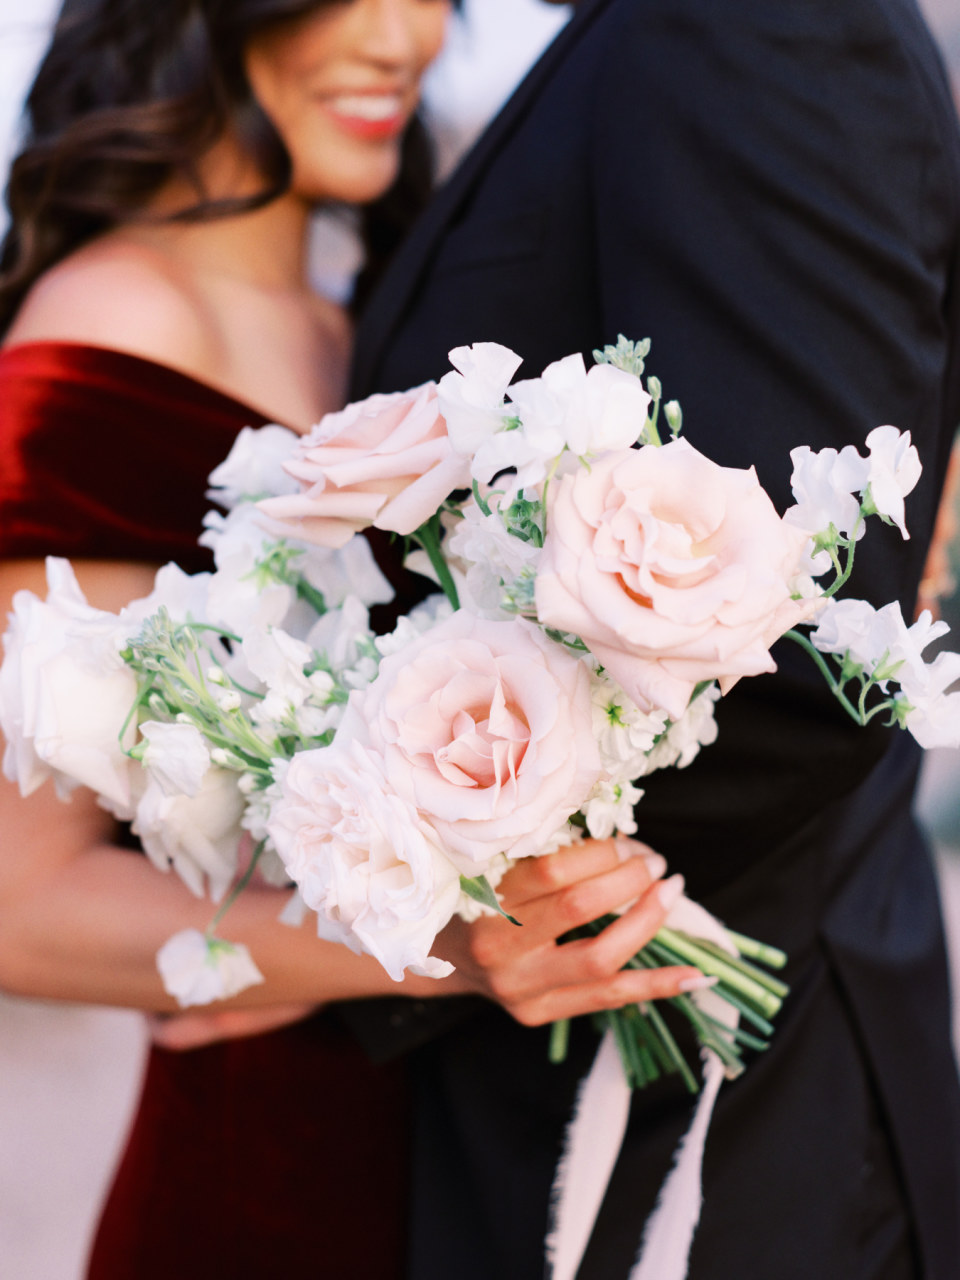 Woman and man in background with bouquet of pink pale flowers and white flowers in her hand.